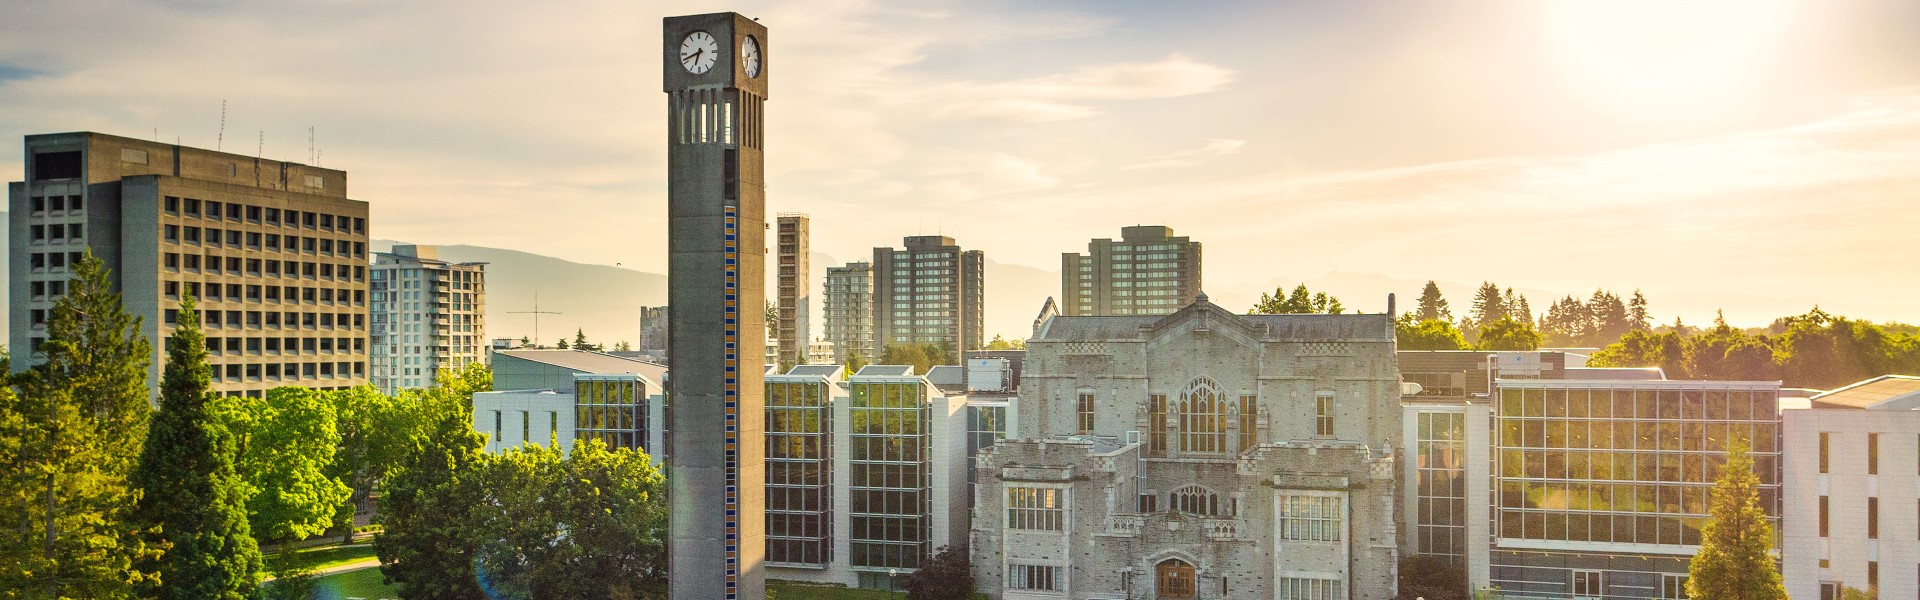 Photo of the Irving K. Barber building and UBC clock tower on the UBC Vancouver campus